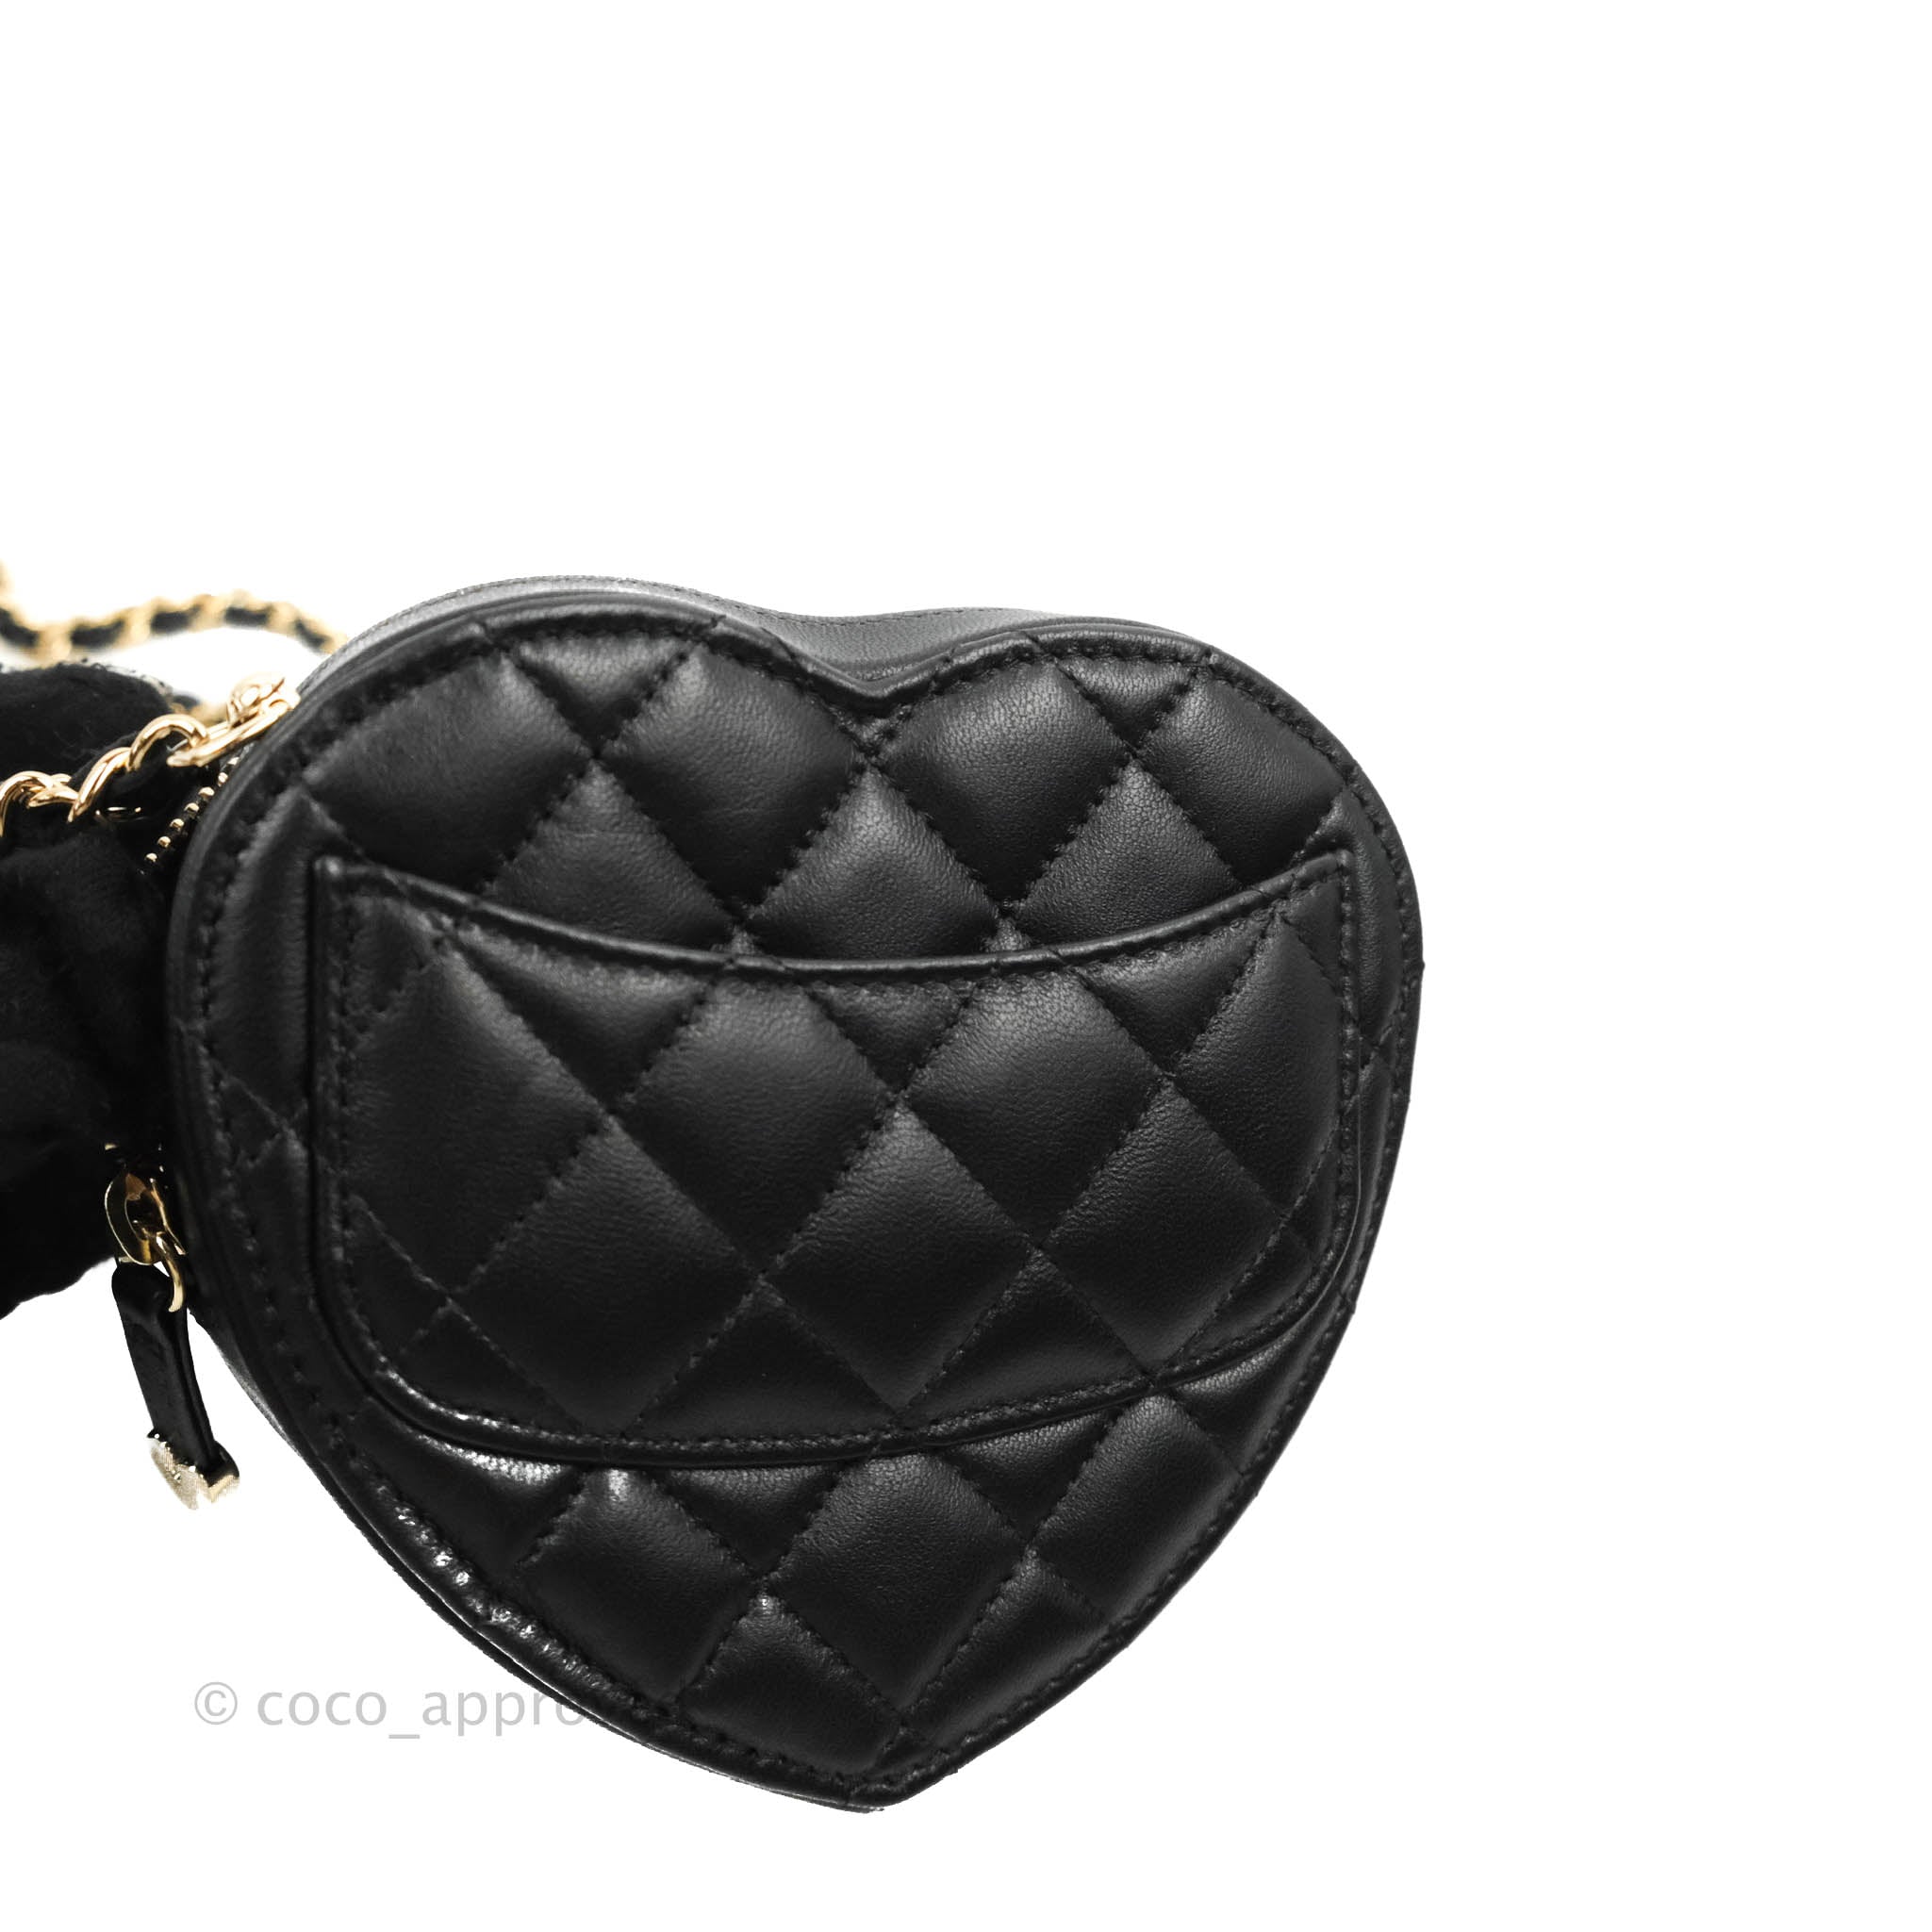 Chanel Small Heart Bag Black Lambskin Gold Hardware 22S – Coco Approved  Studio